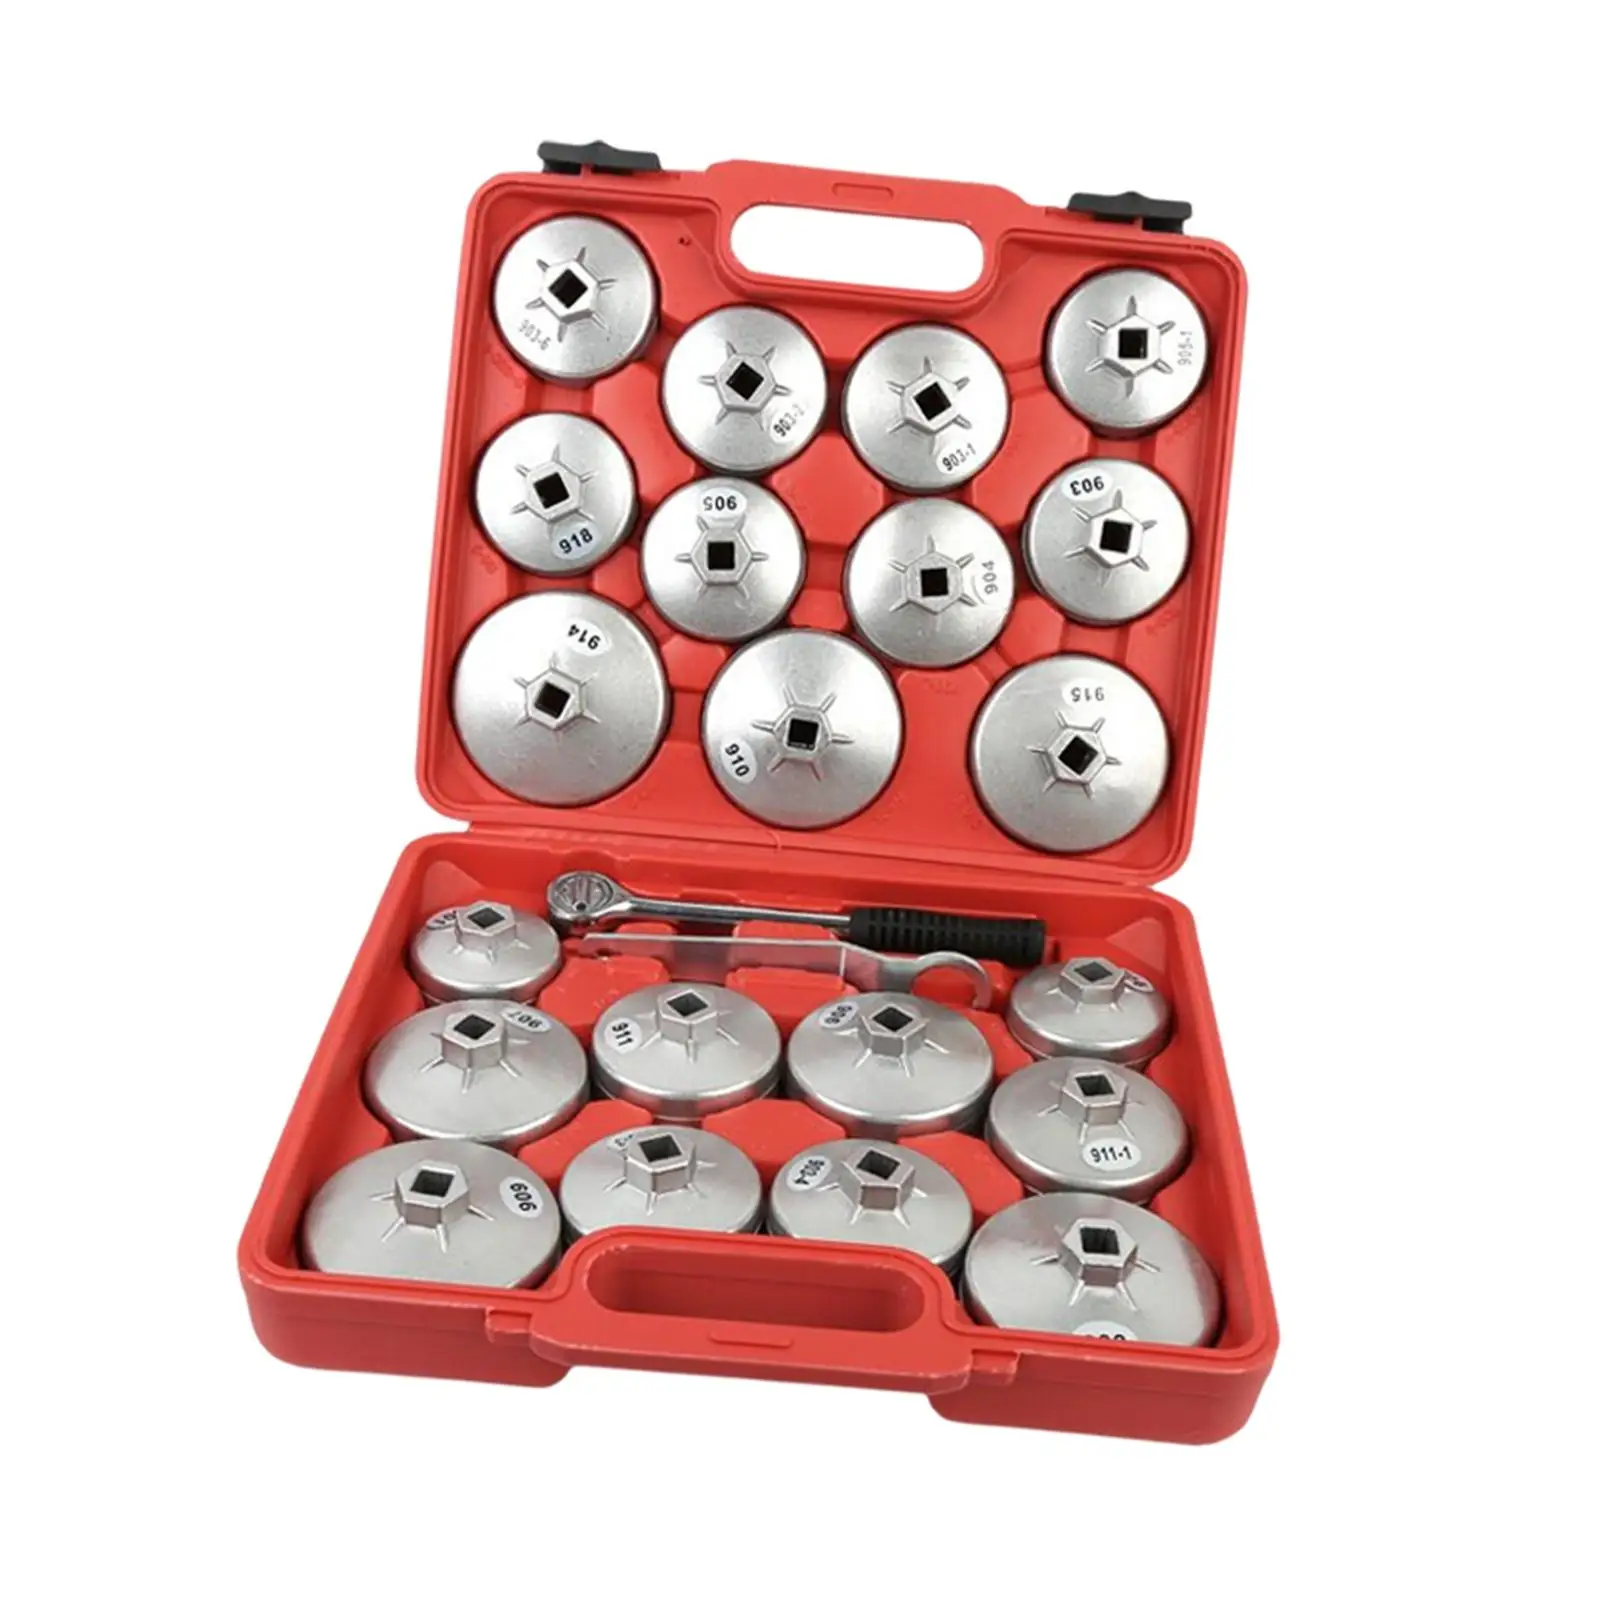 23Pcs Oil Filter Wrench Cup Set Silver Cup Type Wrench Remover Cup for Audi Auto 901-915 Aluminium Car Supplies Auto Parts